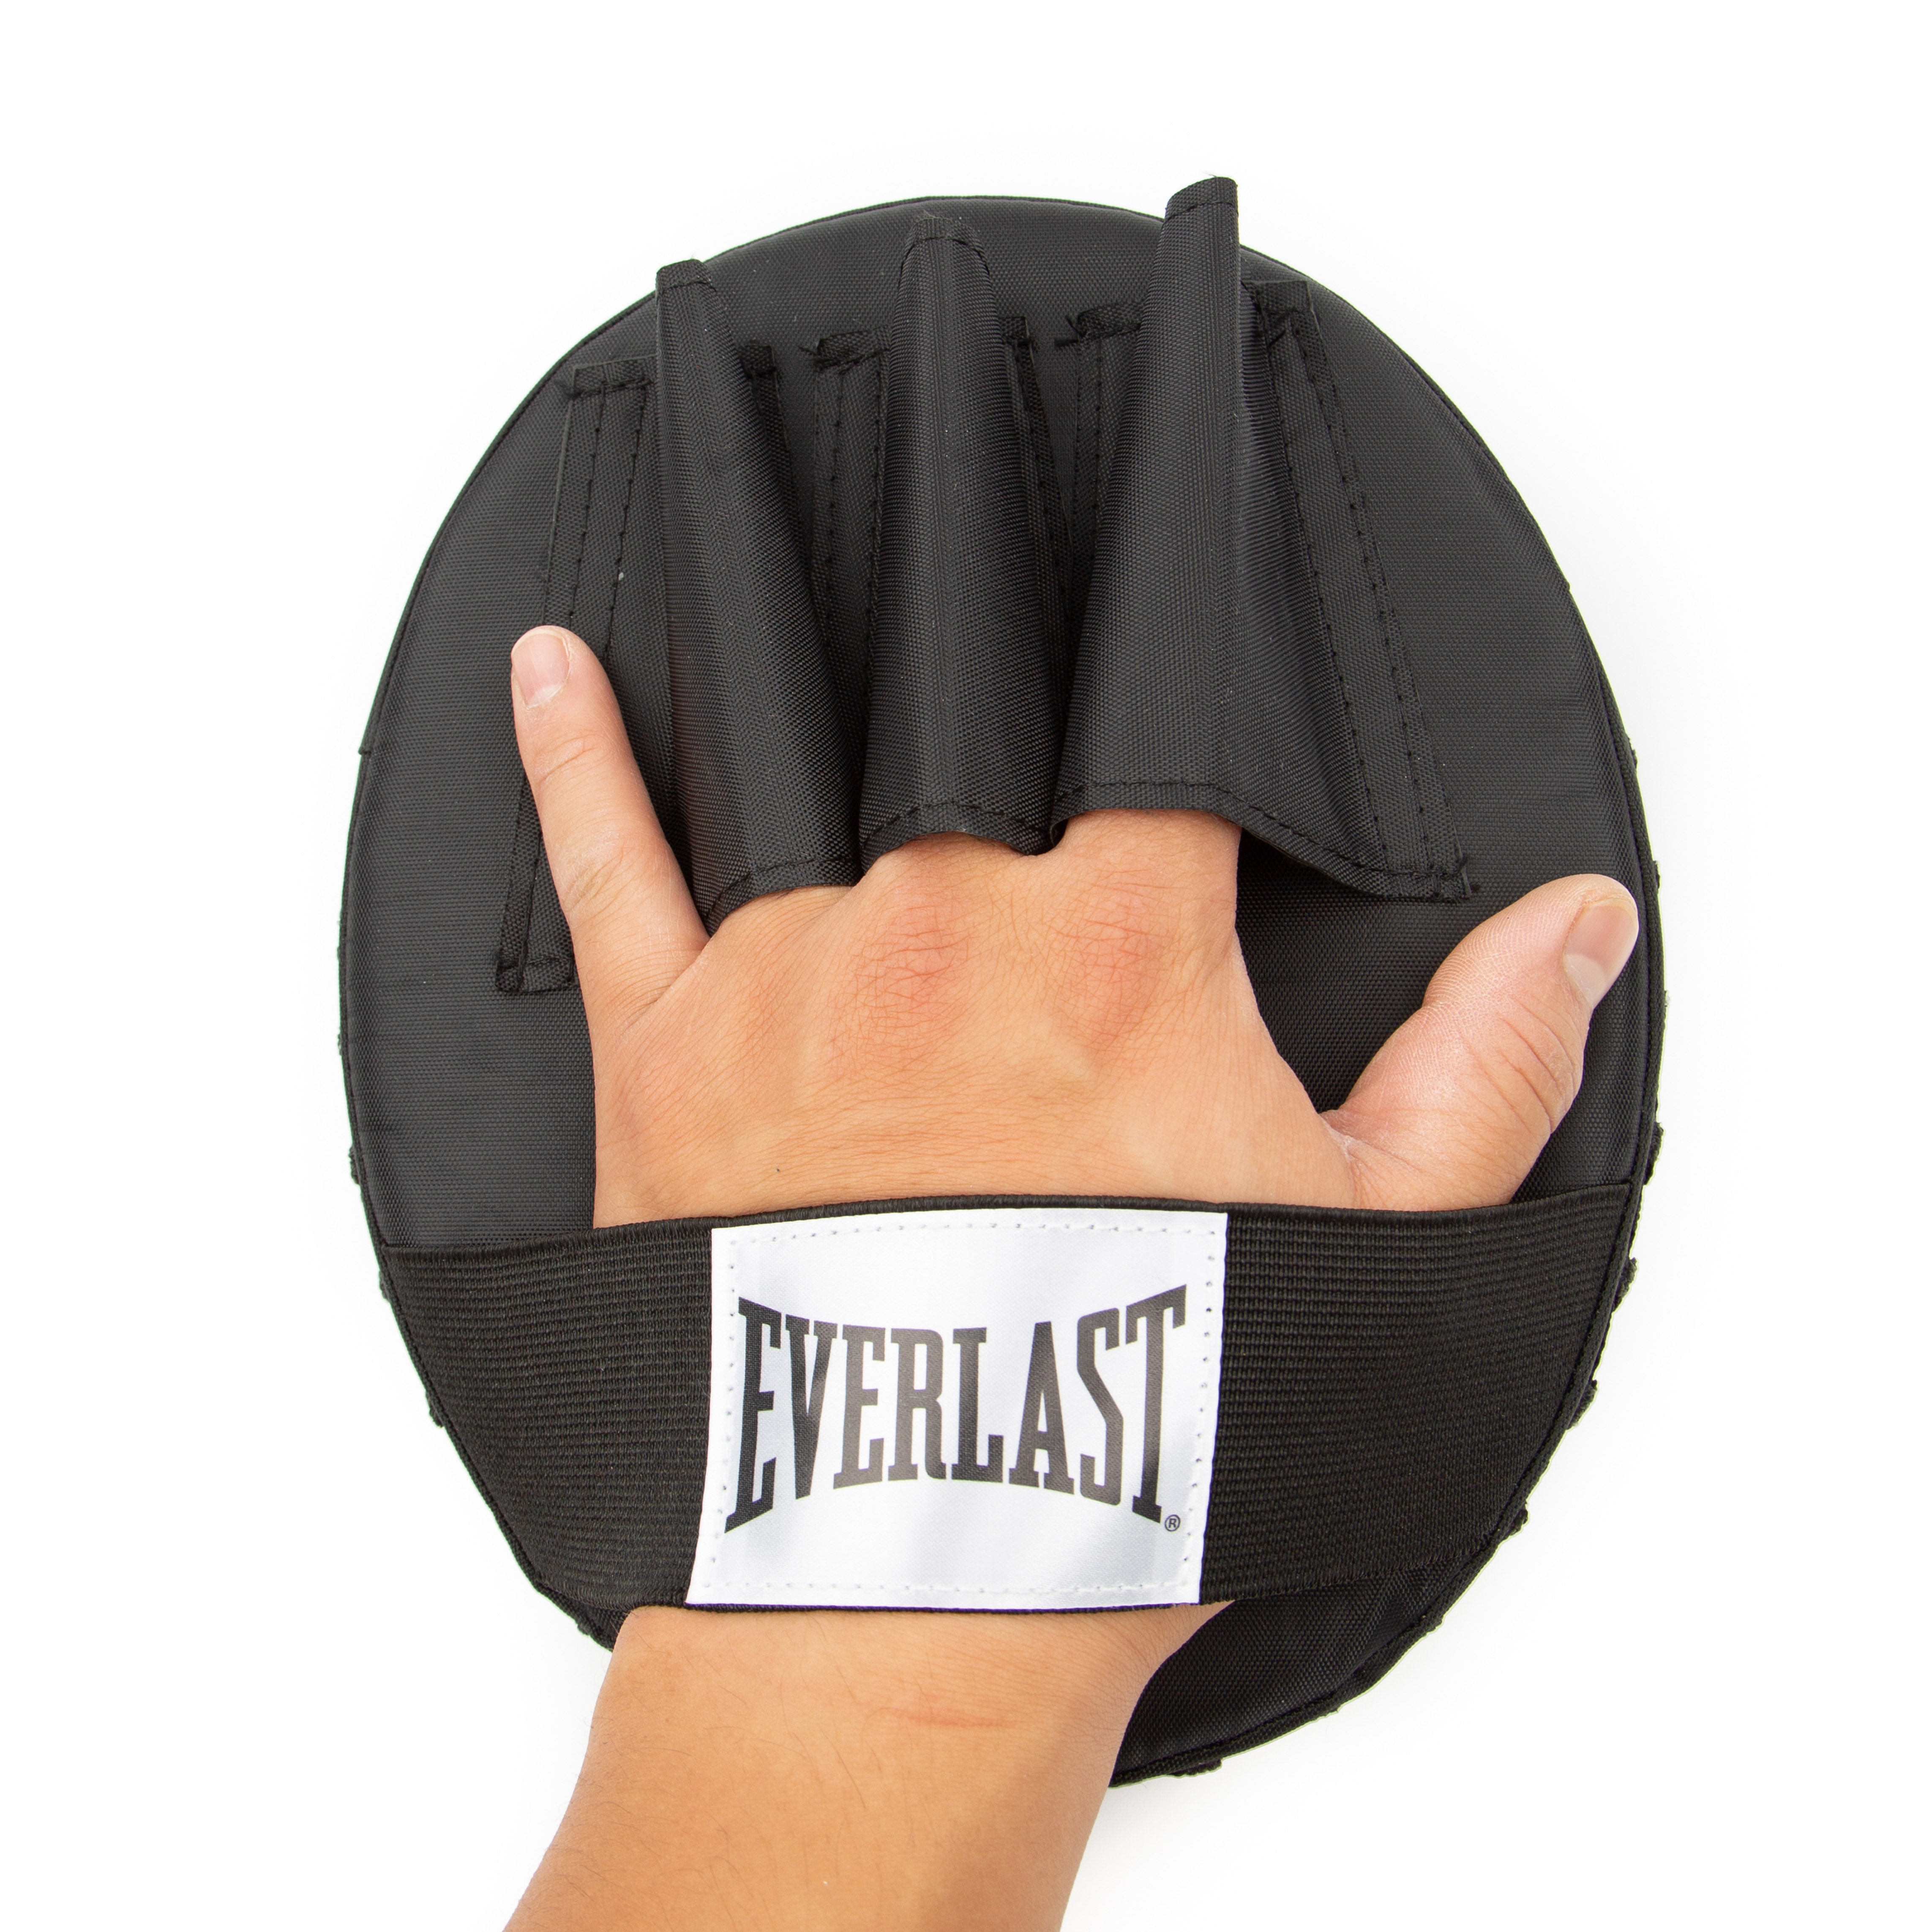 Everlast Punch Mitts Red/Black - image 5 of 7